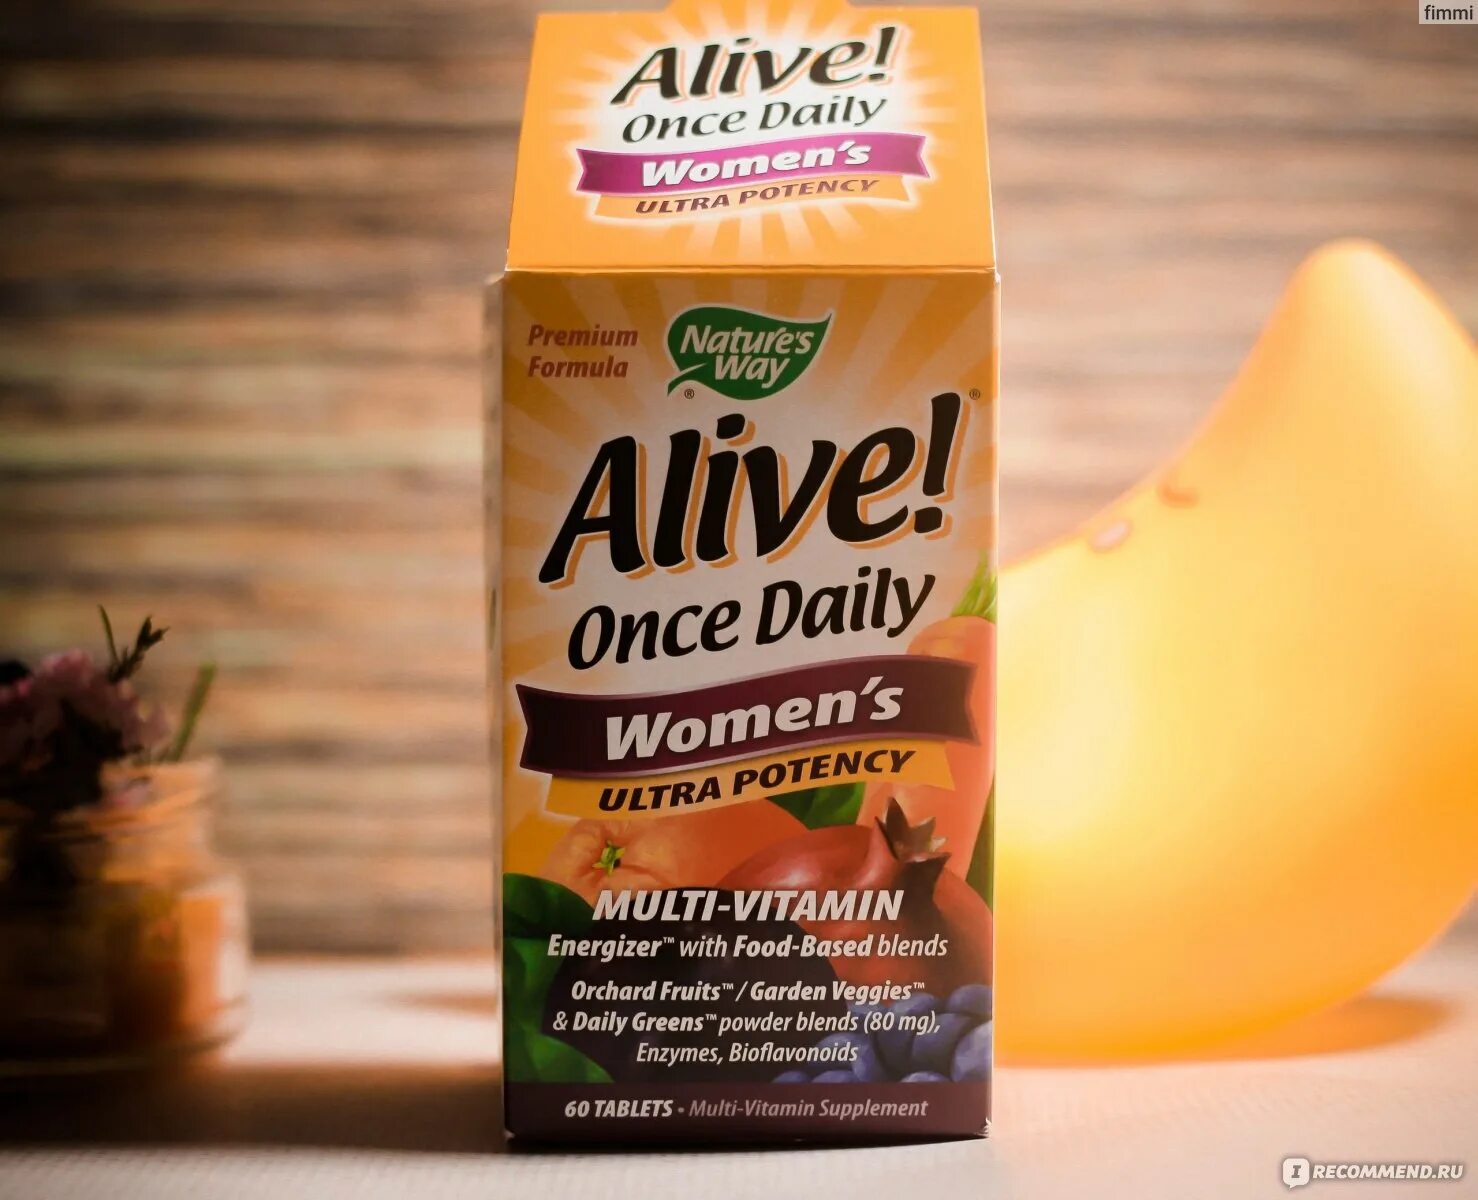 Nature's way Alive once Daily women's Ultra Potency. Витамины Alive women's Ultra Potency. Витаминно-минеральный комплекс nature's way Alive! Once Daily women's Ultra Potency. Nature's way, Alive! Once Daily. Once daily